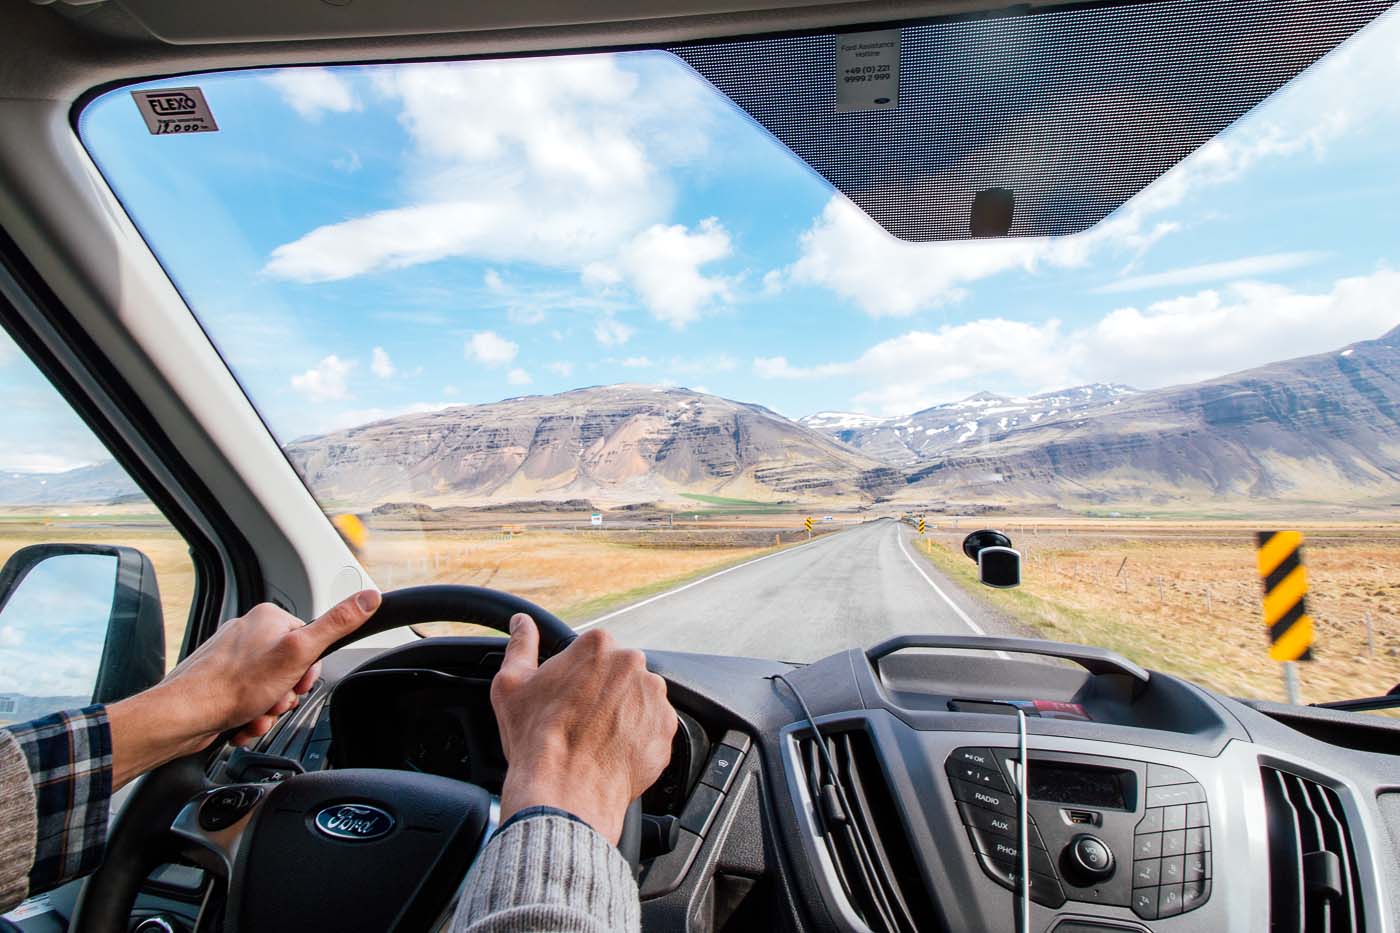 POV shot of driving a campervan on a road in Iceland